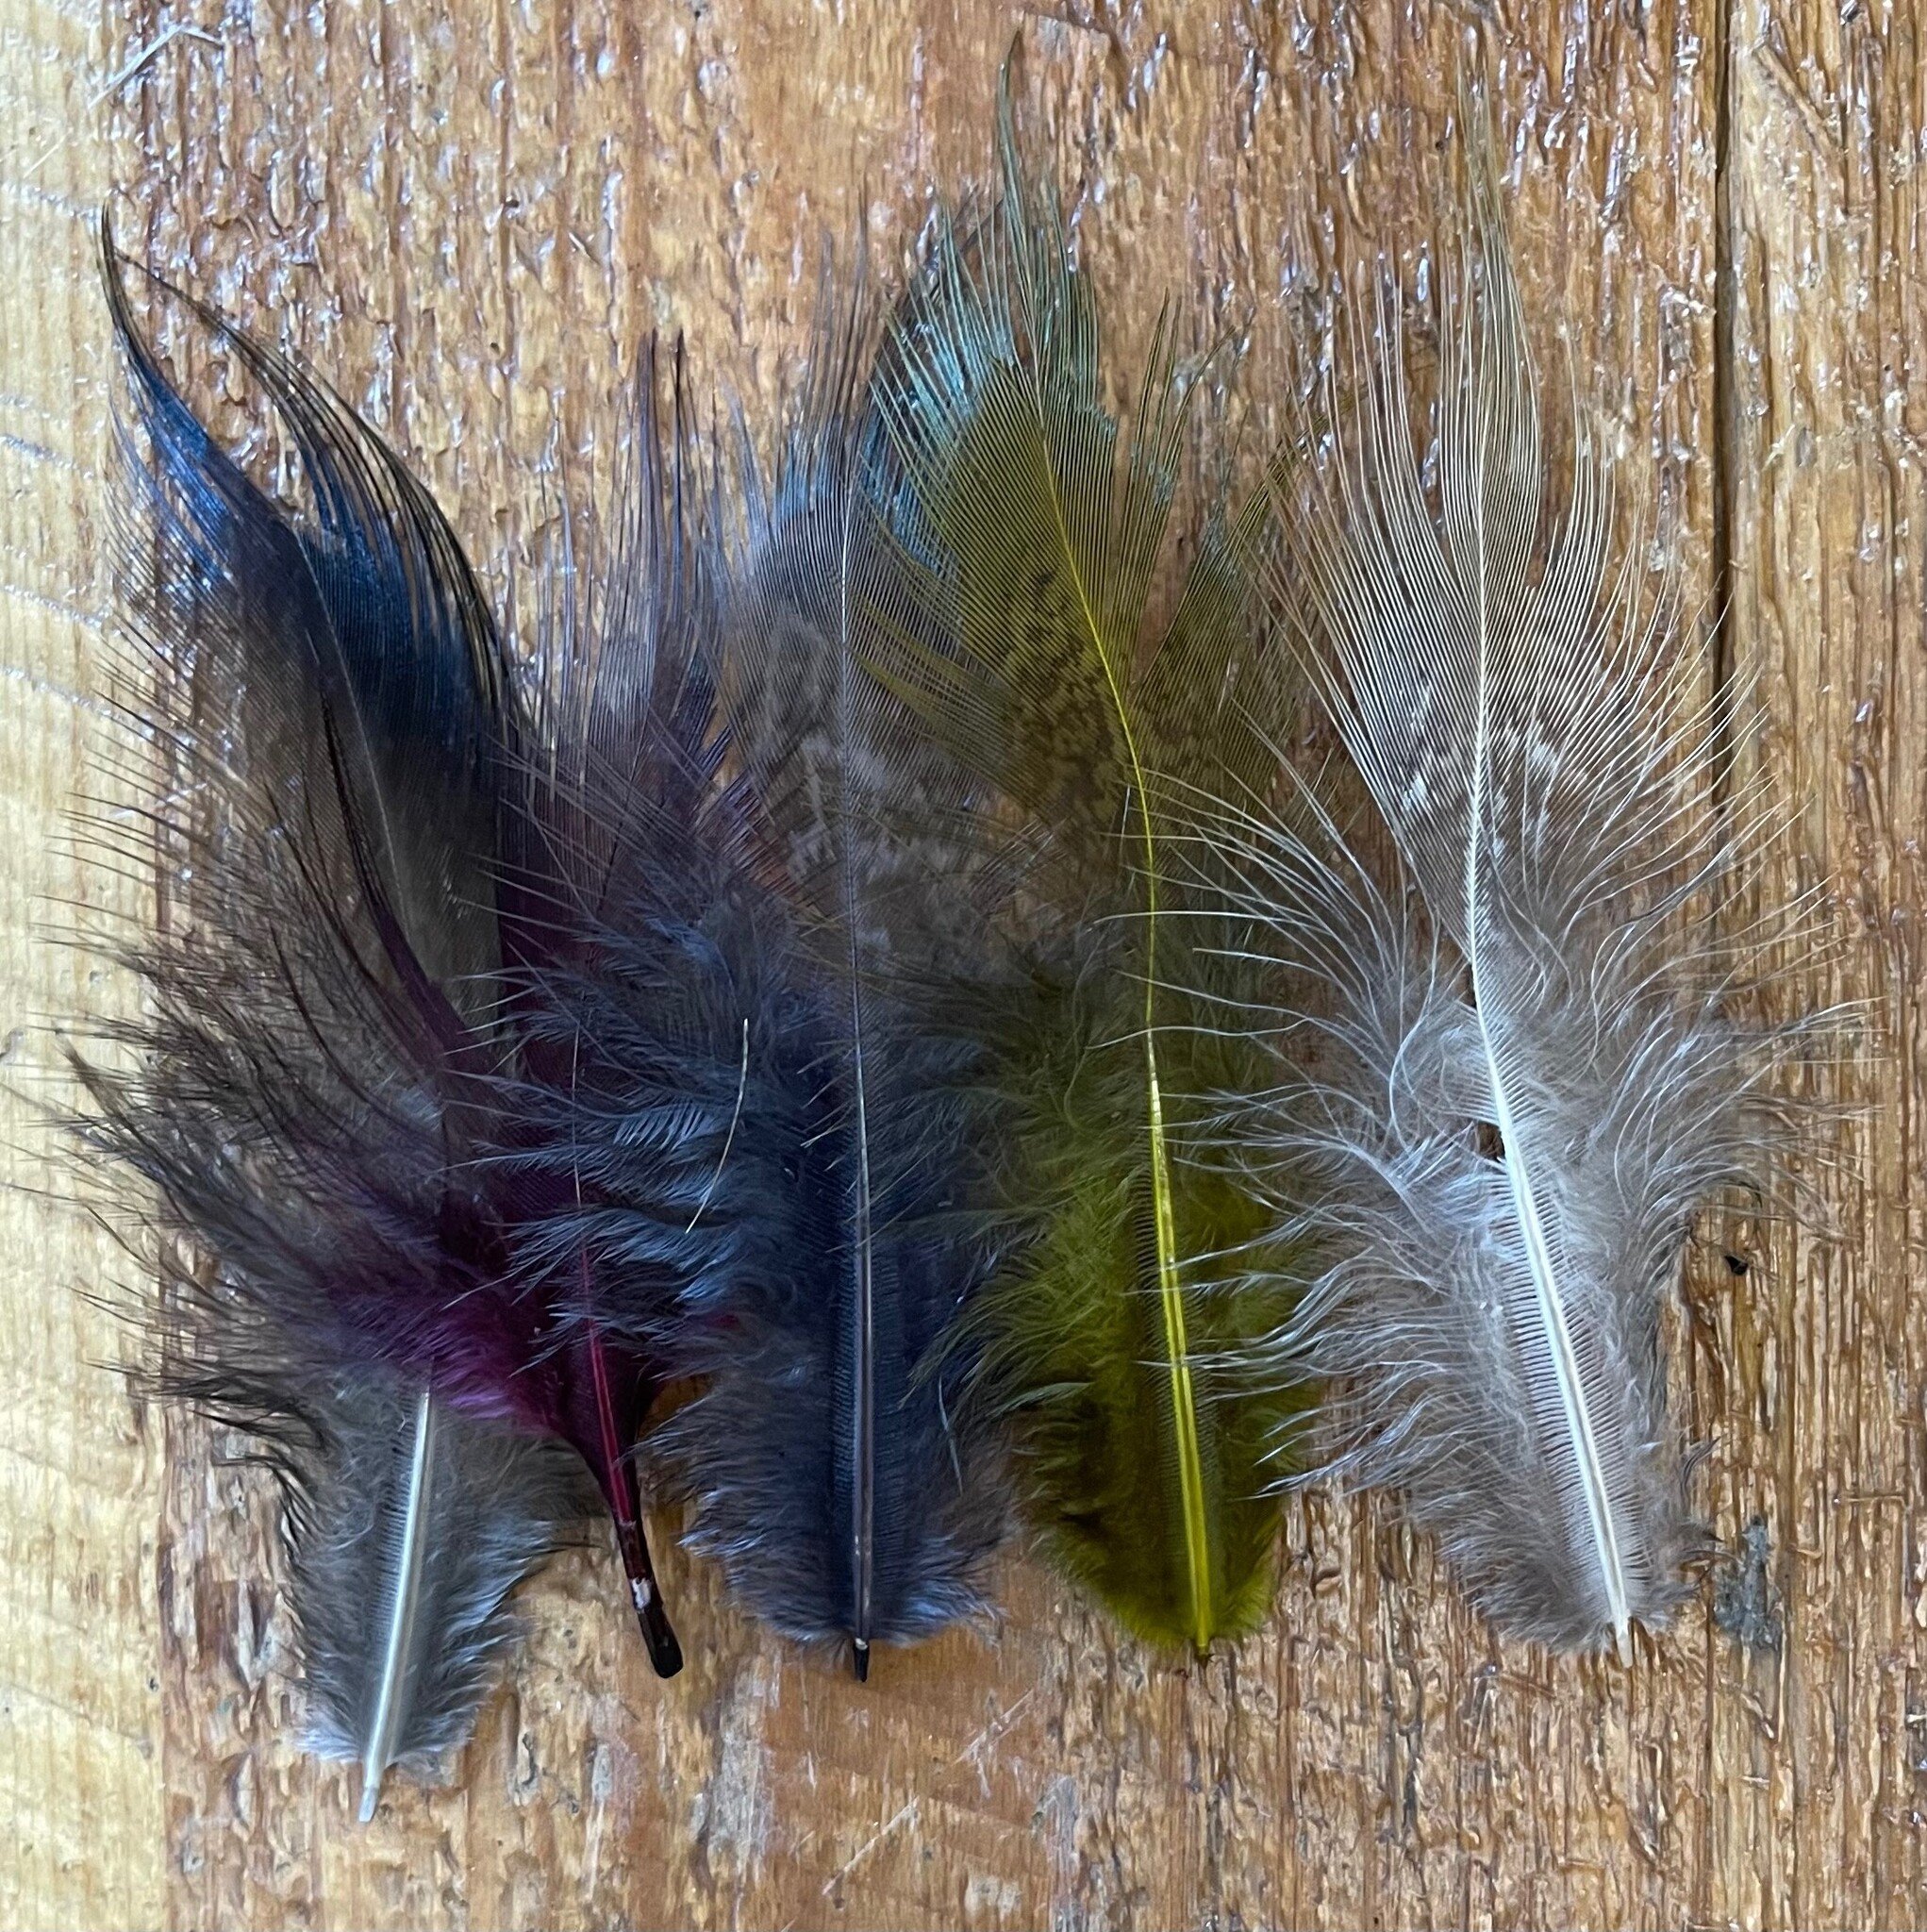 Chevron Hackle - Pheasant Rump Patch – Jerry French Fly Fishing